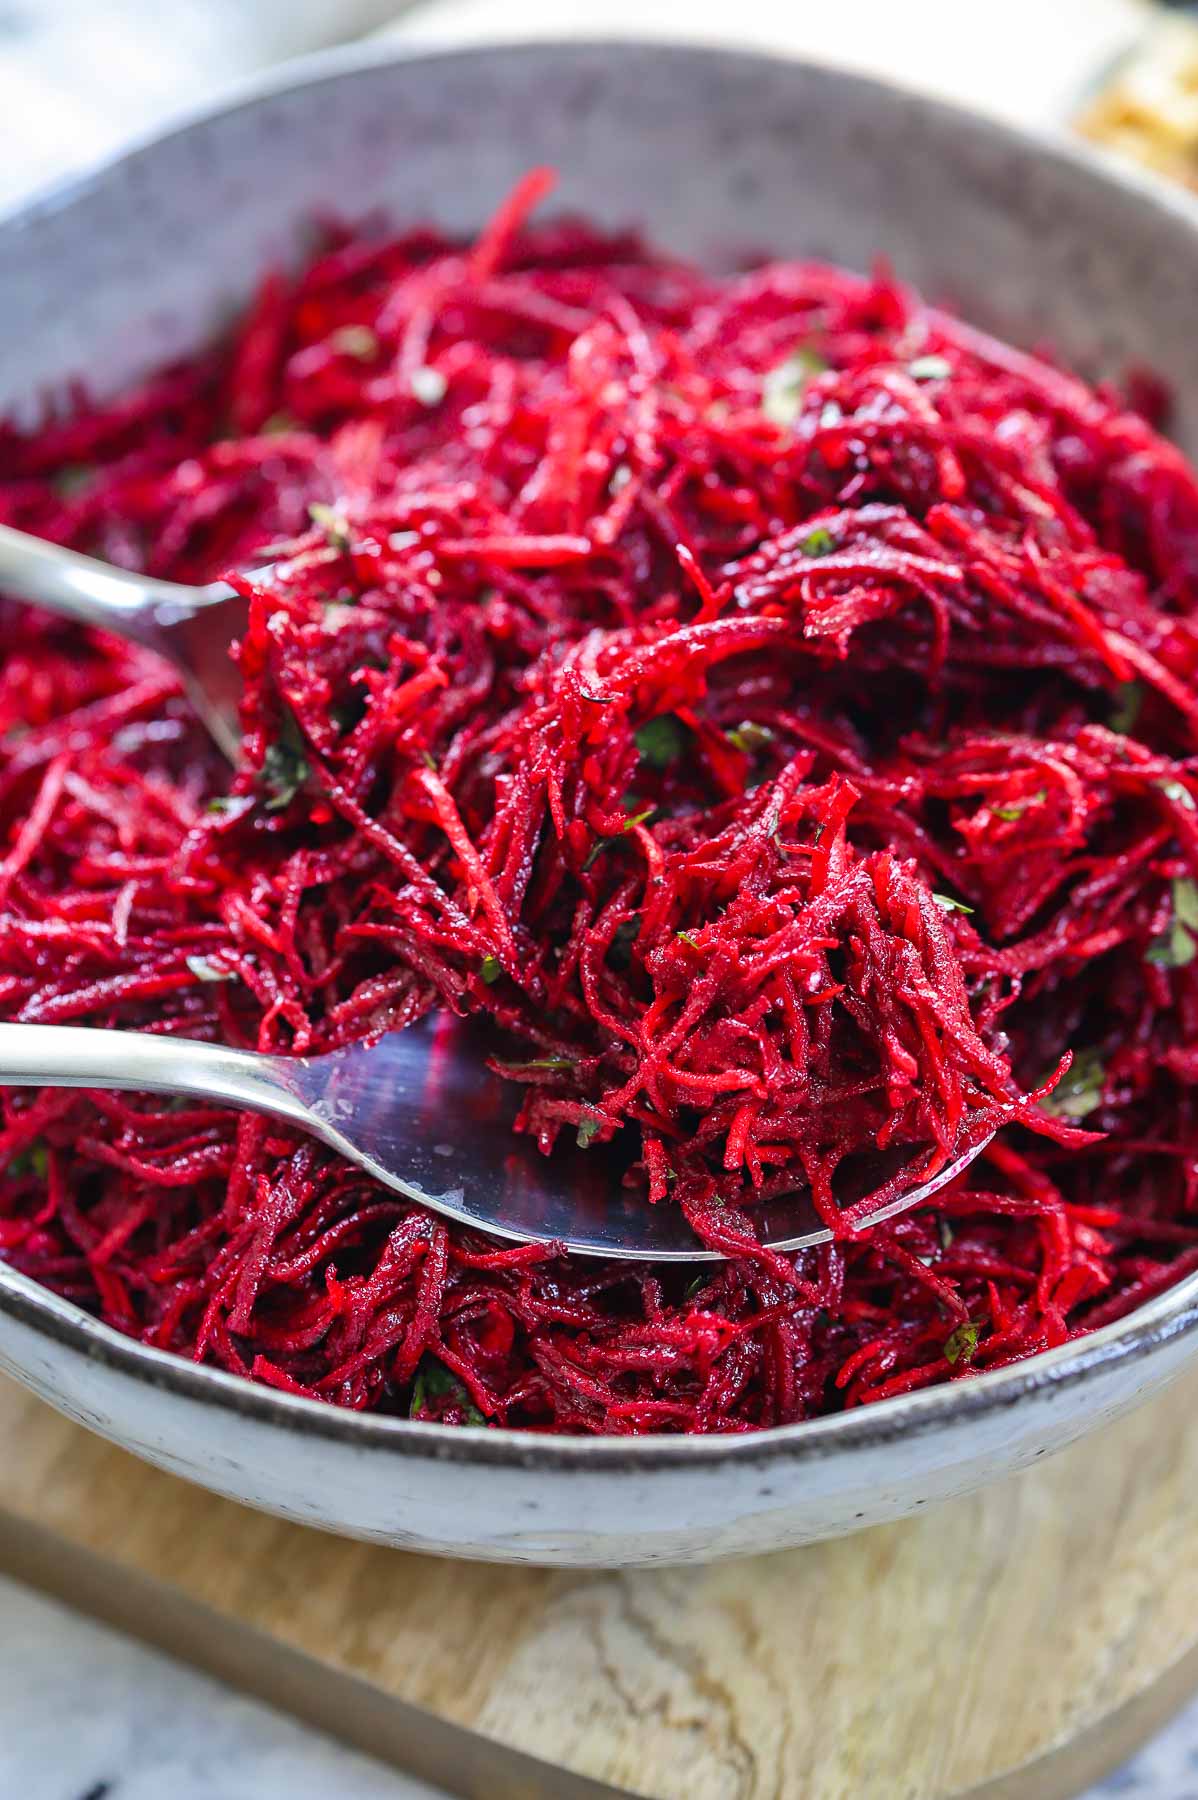 Beet and Carrot Salad (Beetroot Slaw with Carrots recipe)